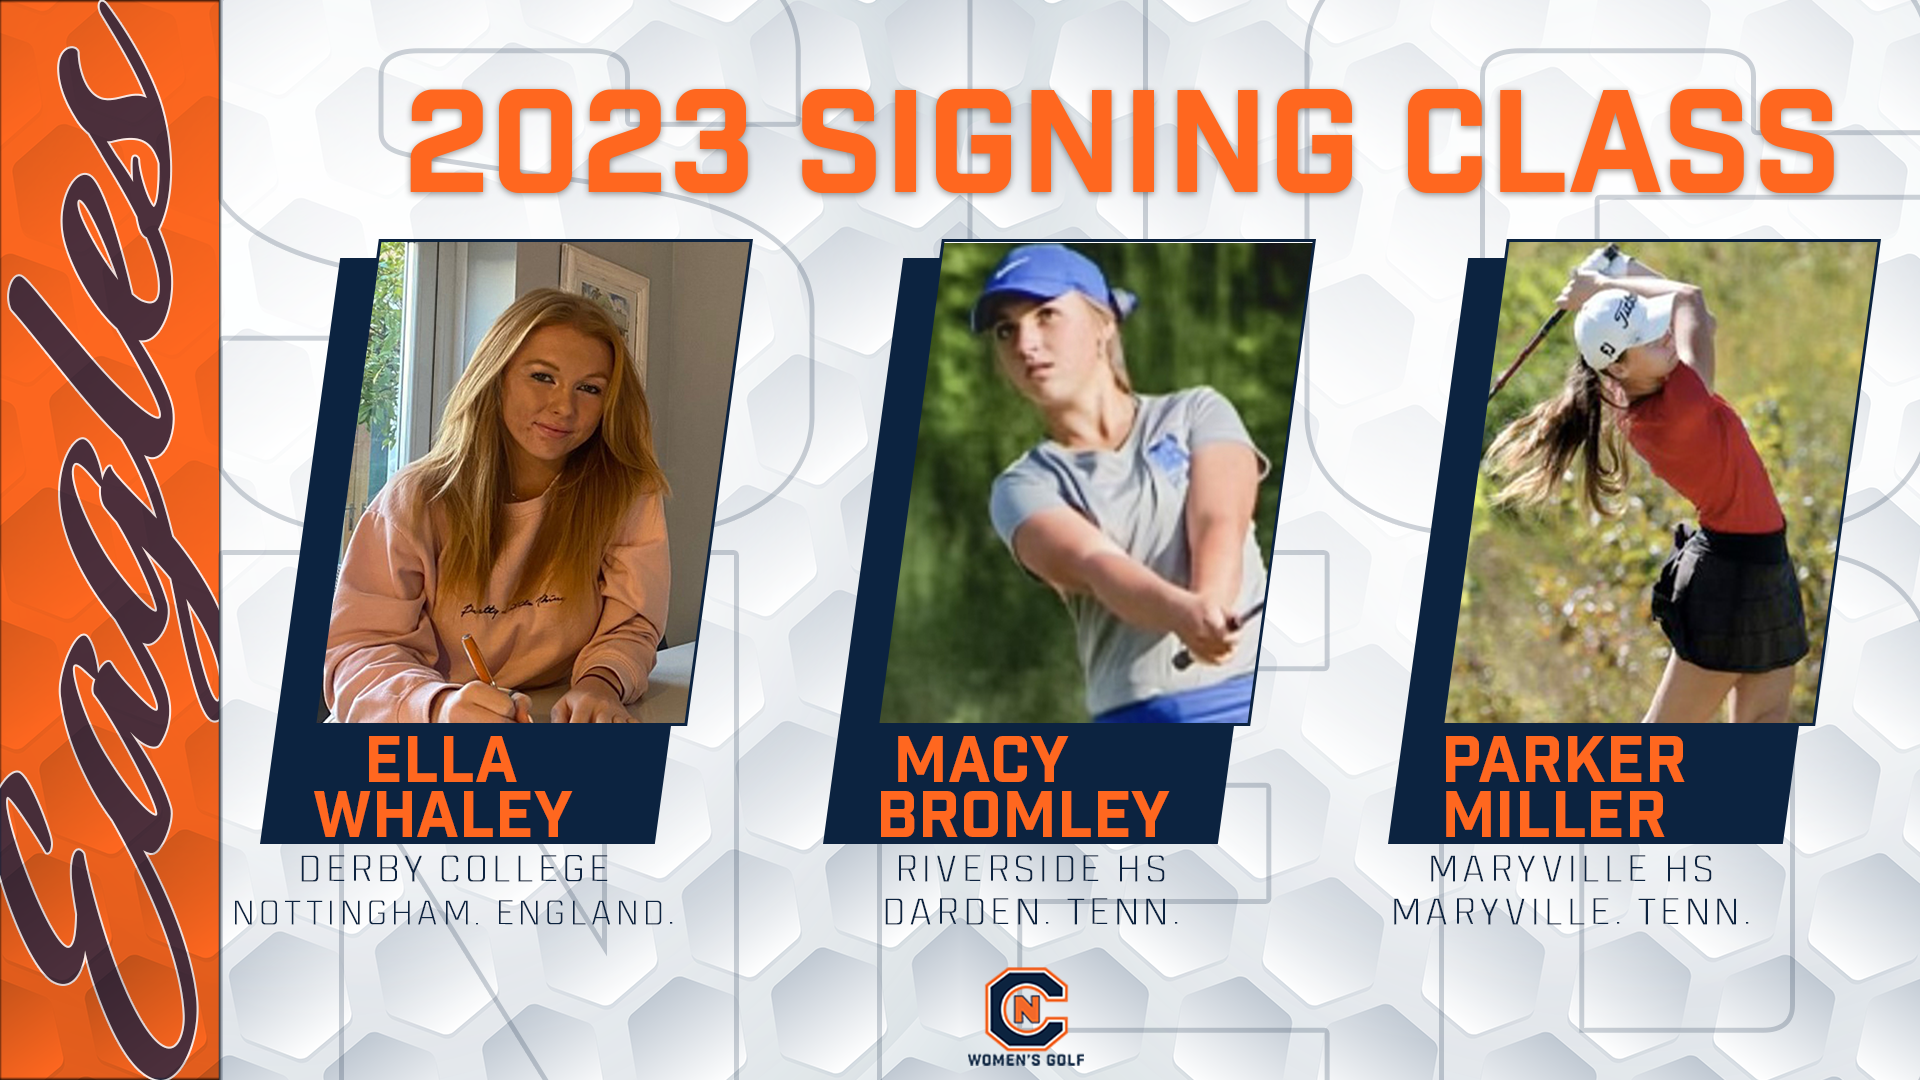 Women’s Golf welcomes three newcomers for 2023 class